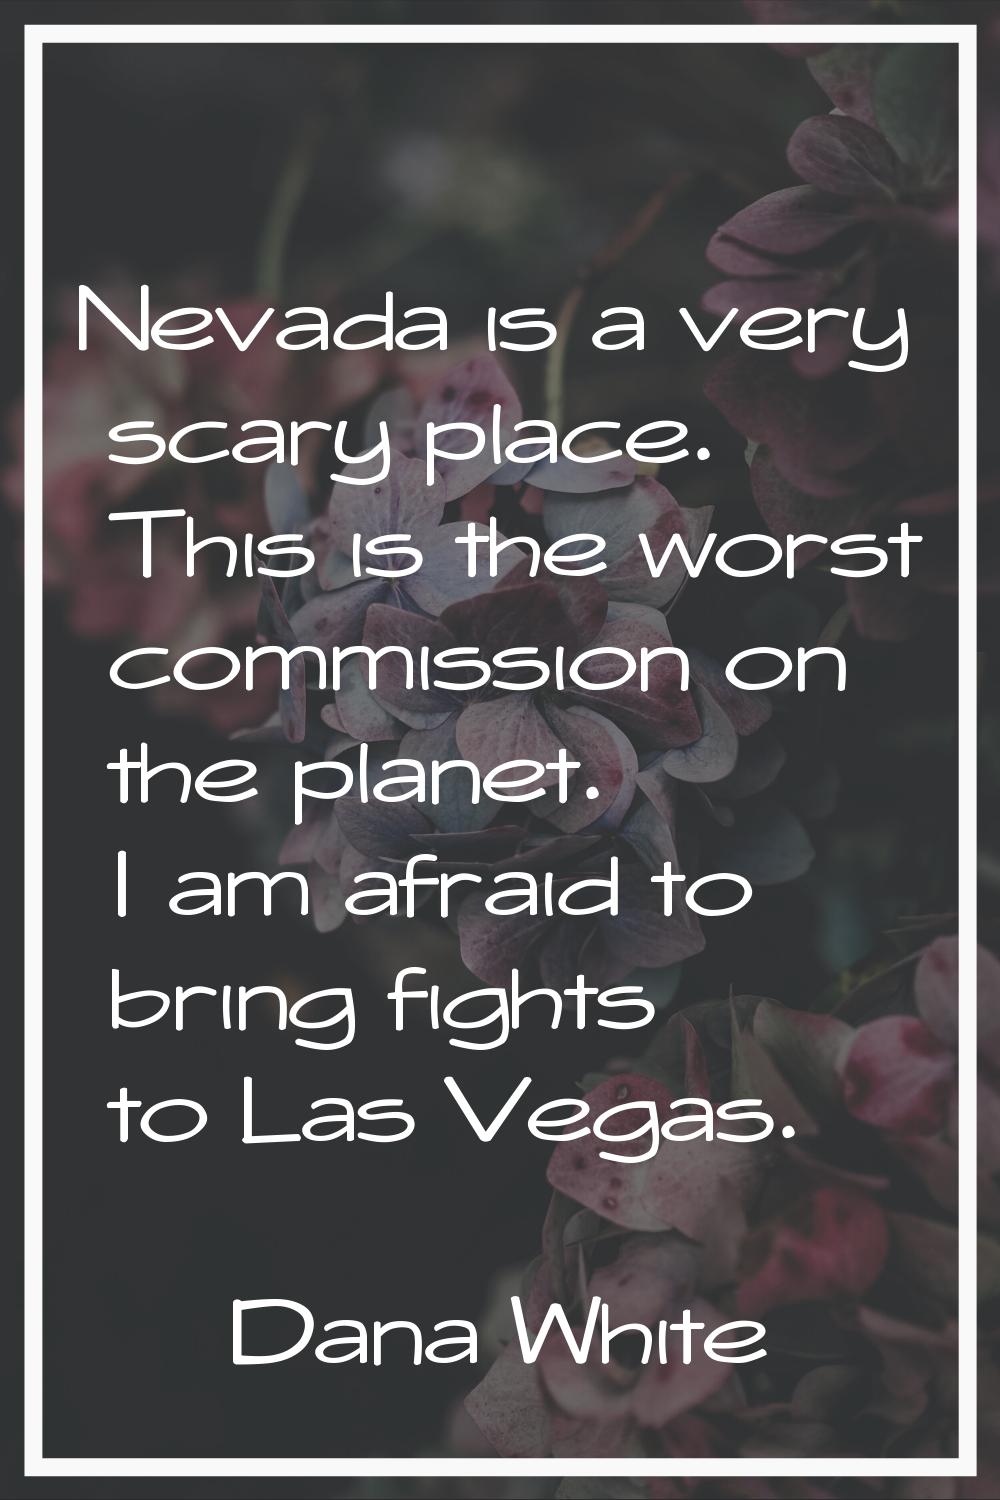 Nevada is a very scary place. This is the worst commission on the planet. I am afraid to bring figh